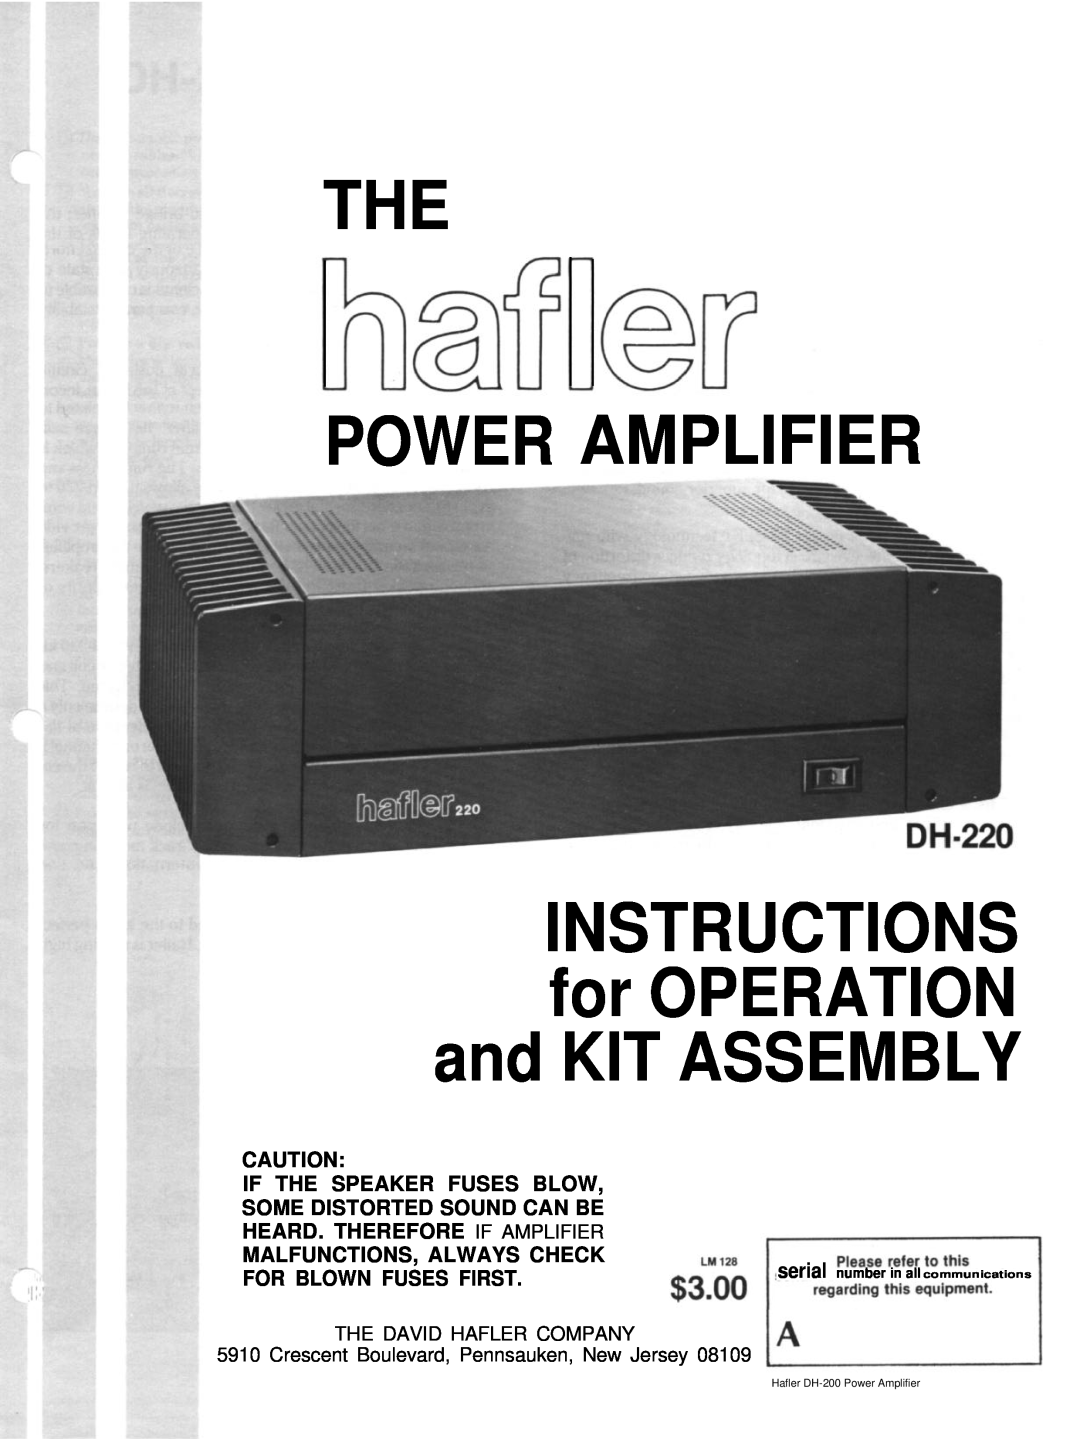 Hafler DH-200 manual If The Speaker Fuses Blow, Some Distorted Sound Can Be, Heard. Therefore If Amplifier 